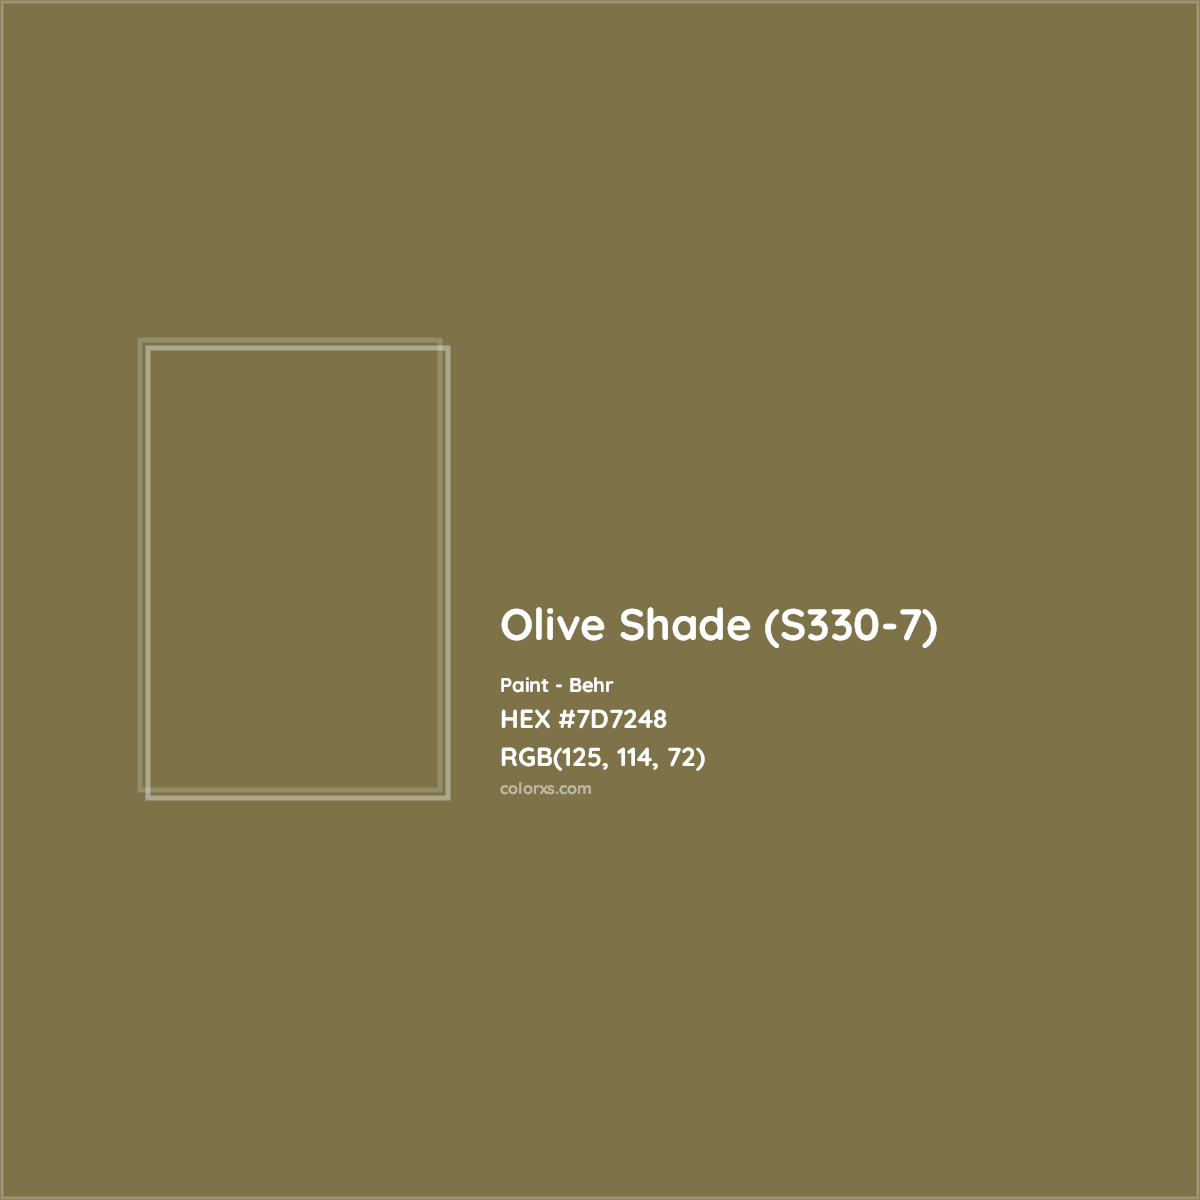 HEX #7D7248 Olive Shade (S330-7) Paint Behr - Color Code